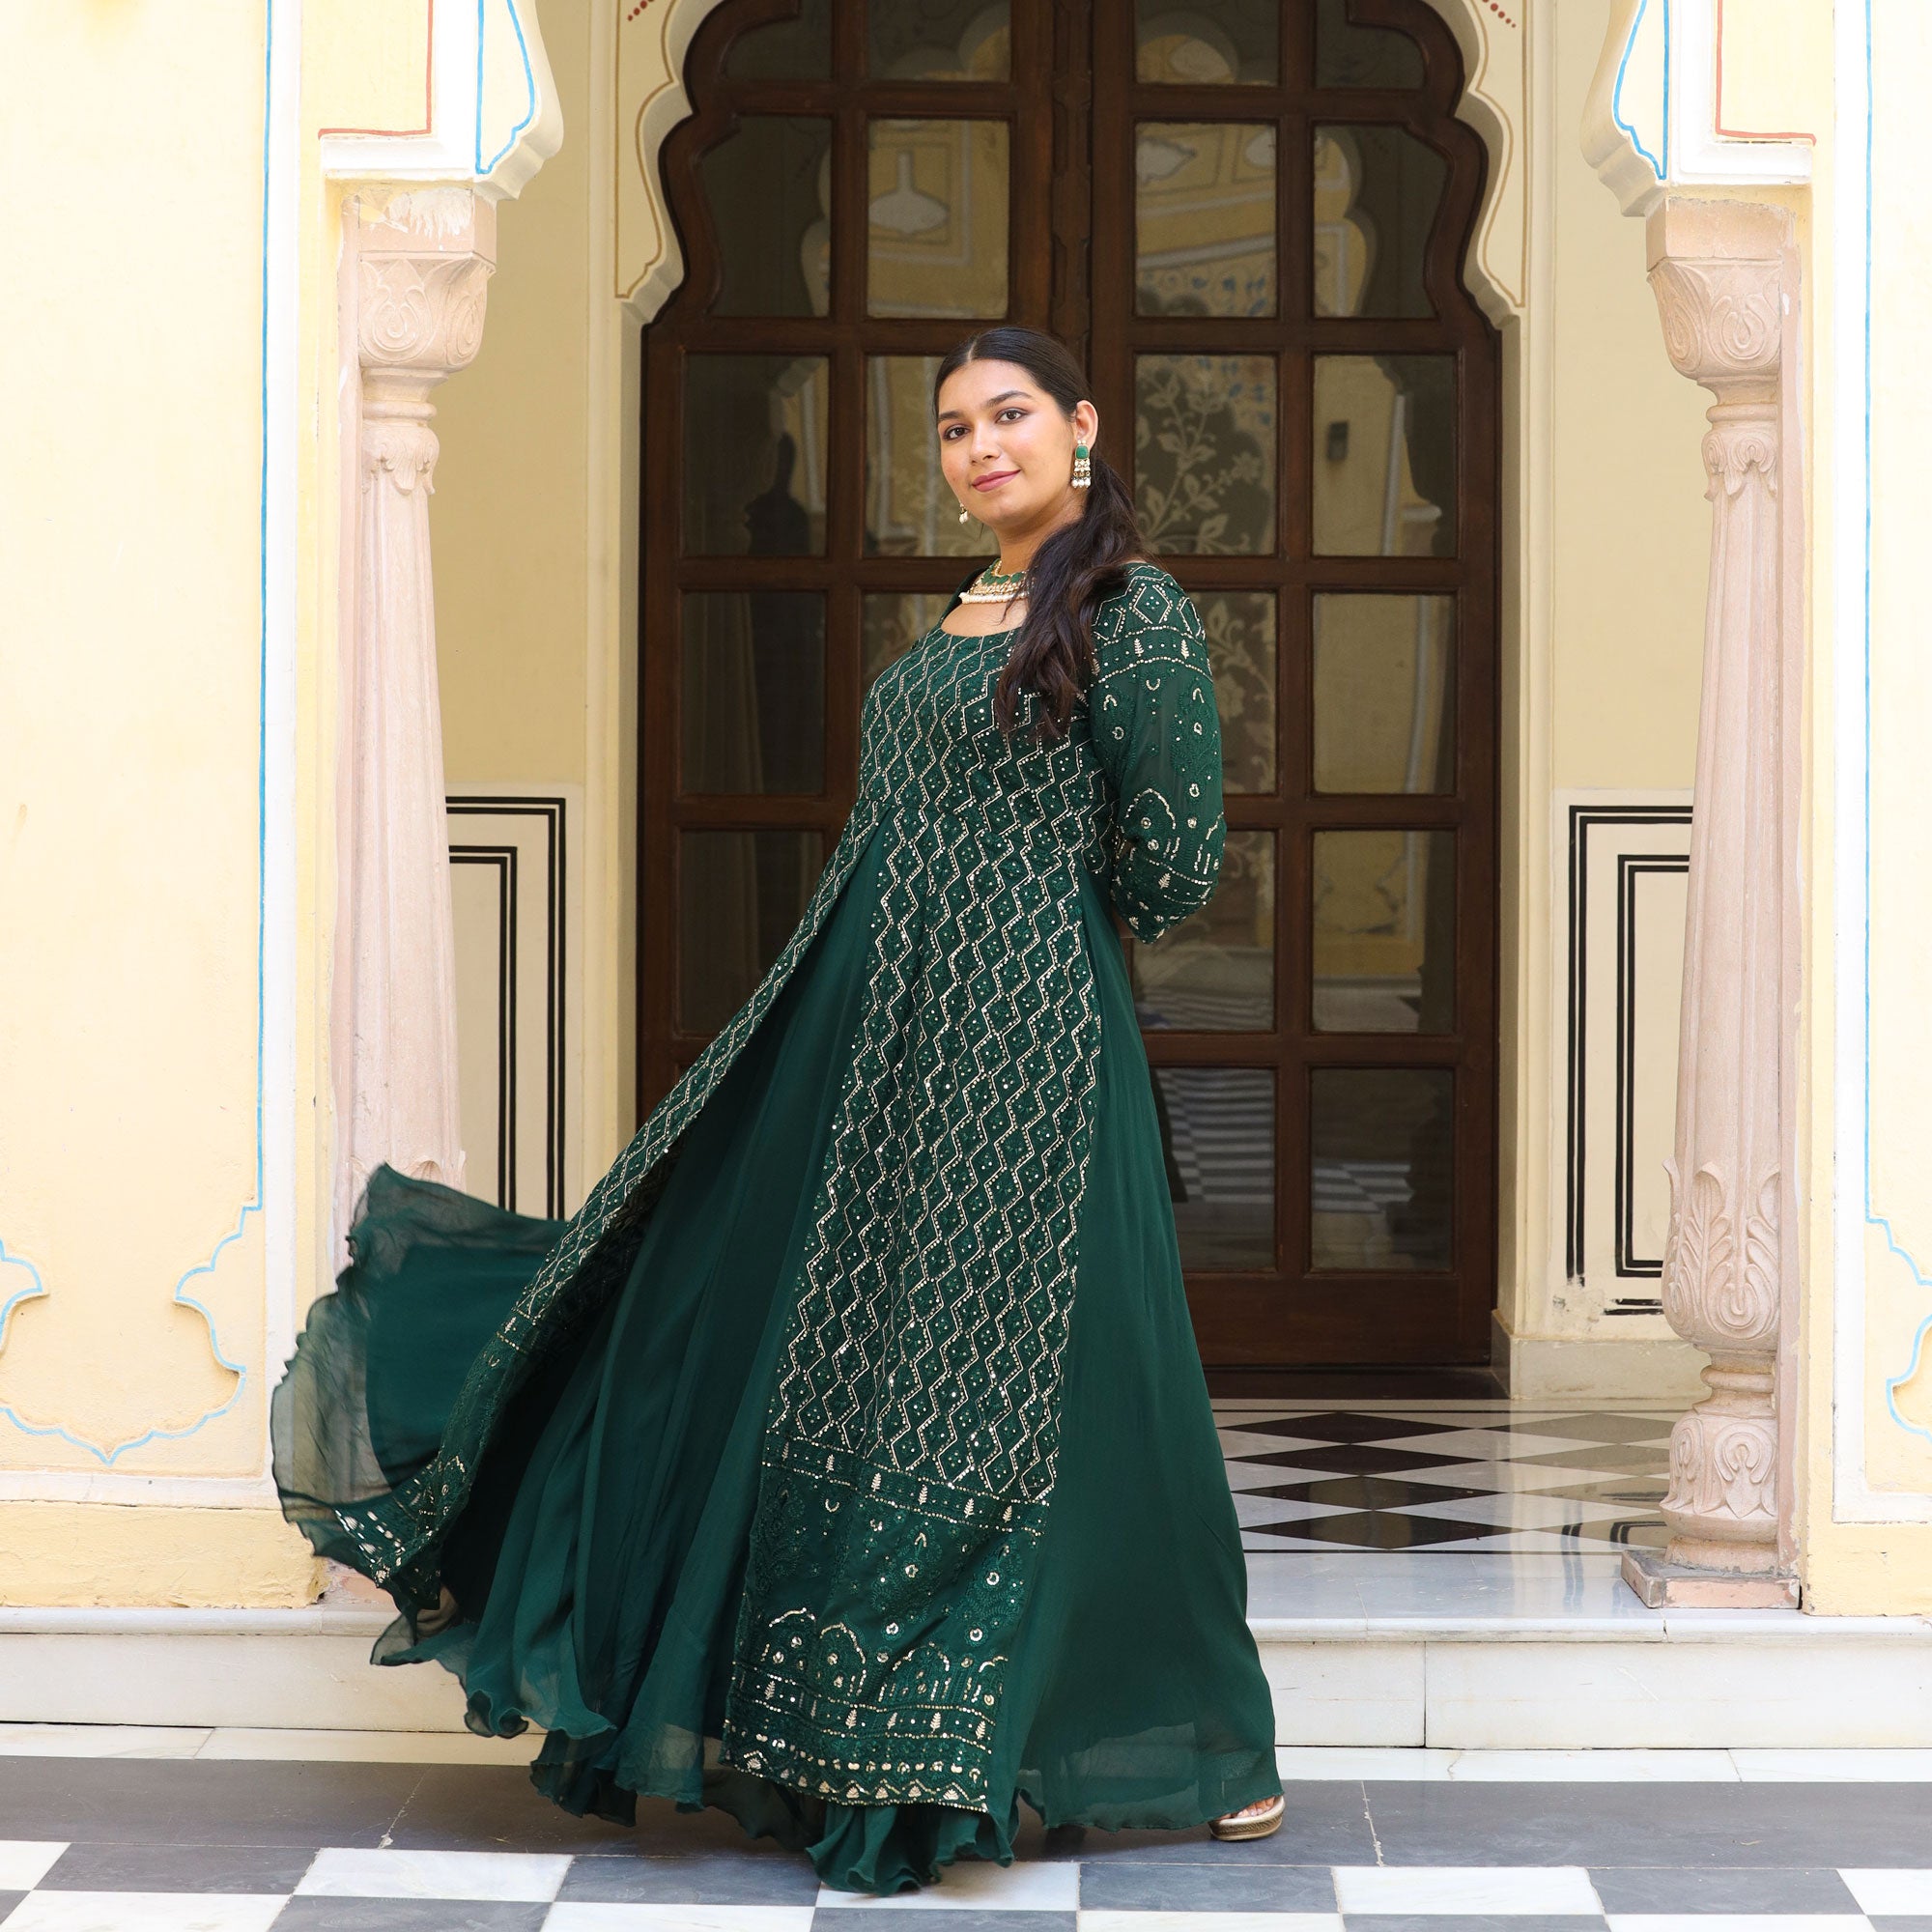 Ethnic Gowns | Amazing Long Gown For Women Party Wear Dress Size XL Colour  Bottle Green | Freeup